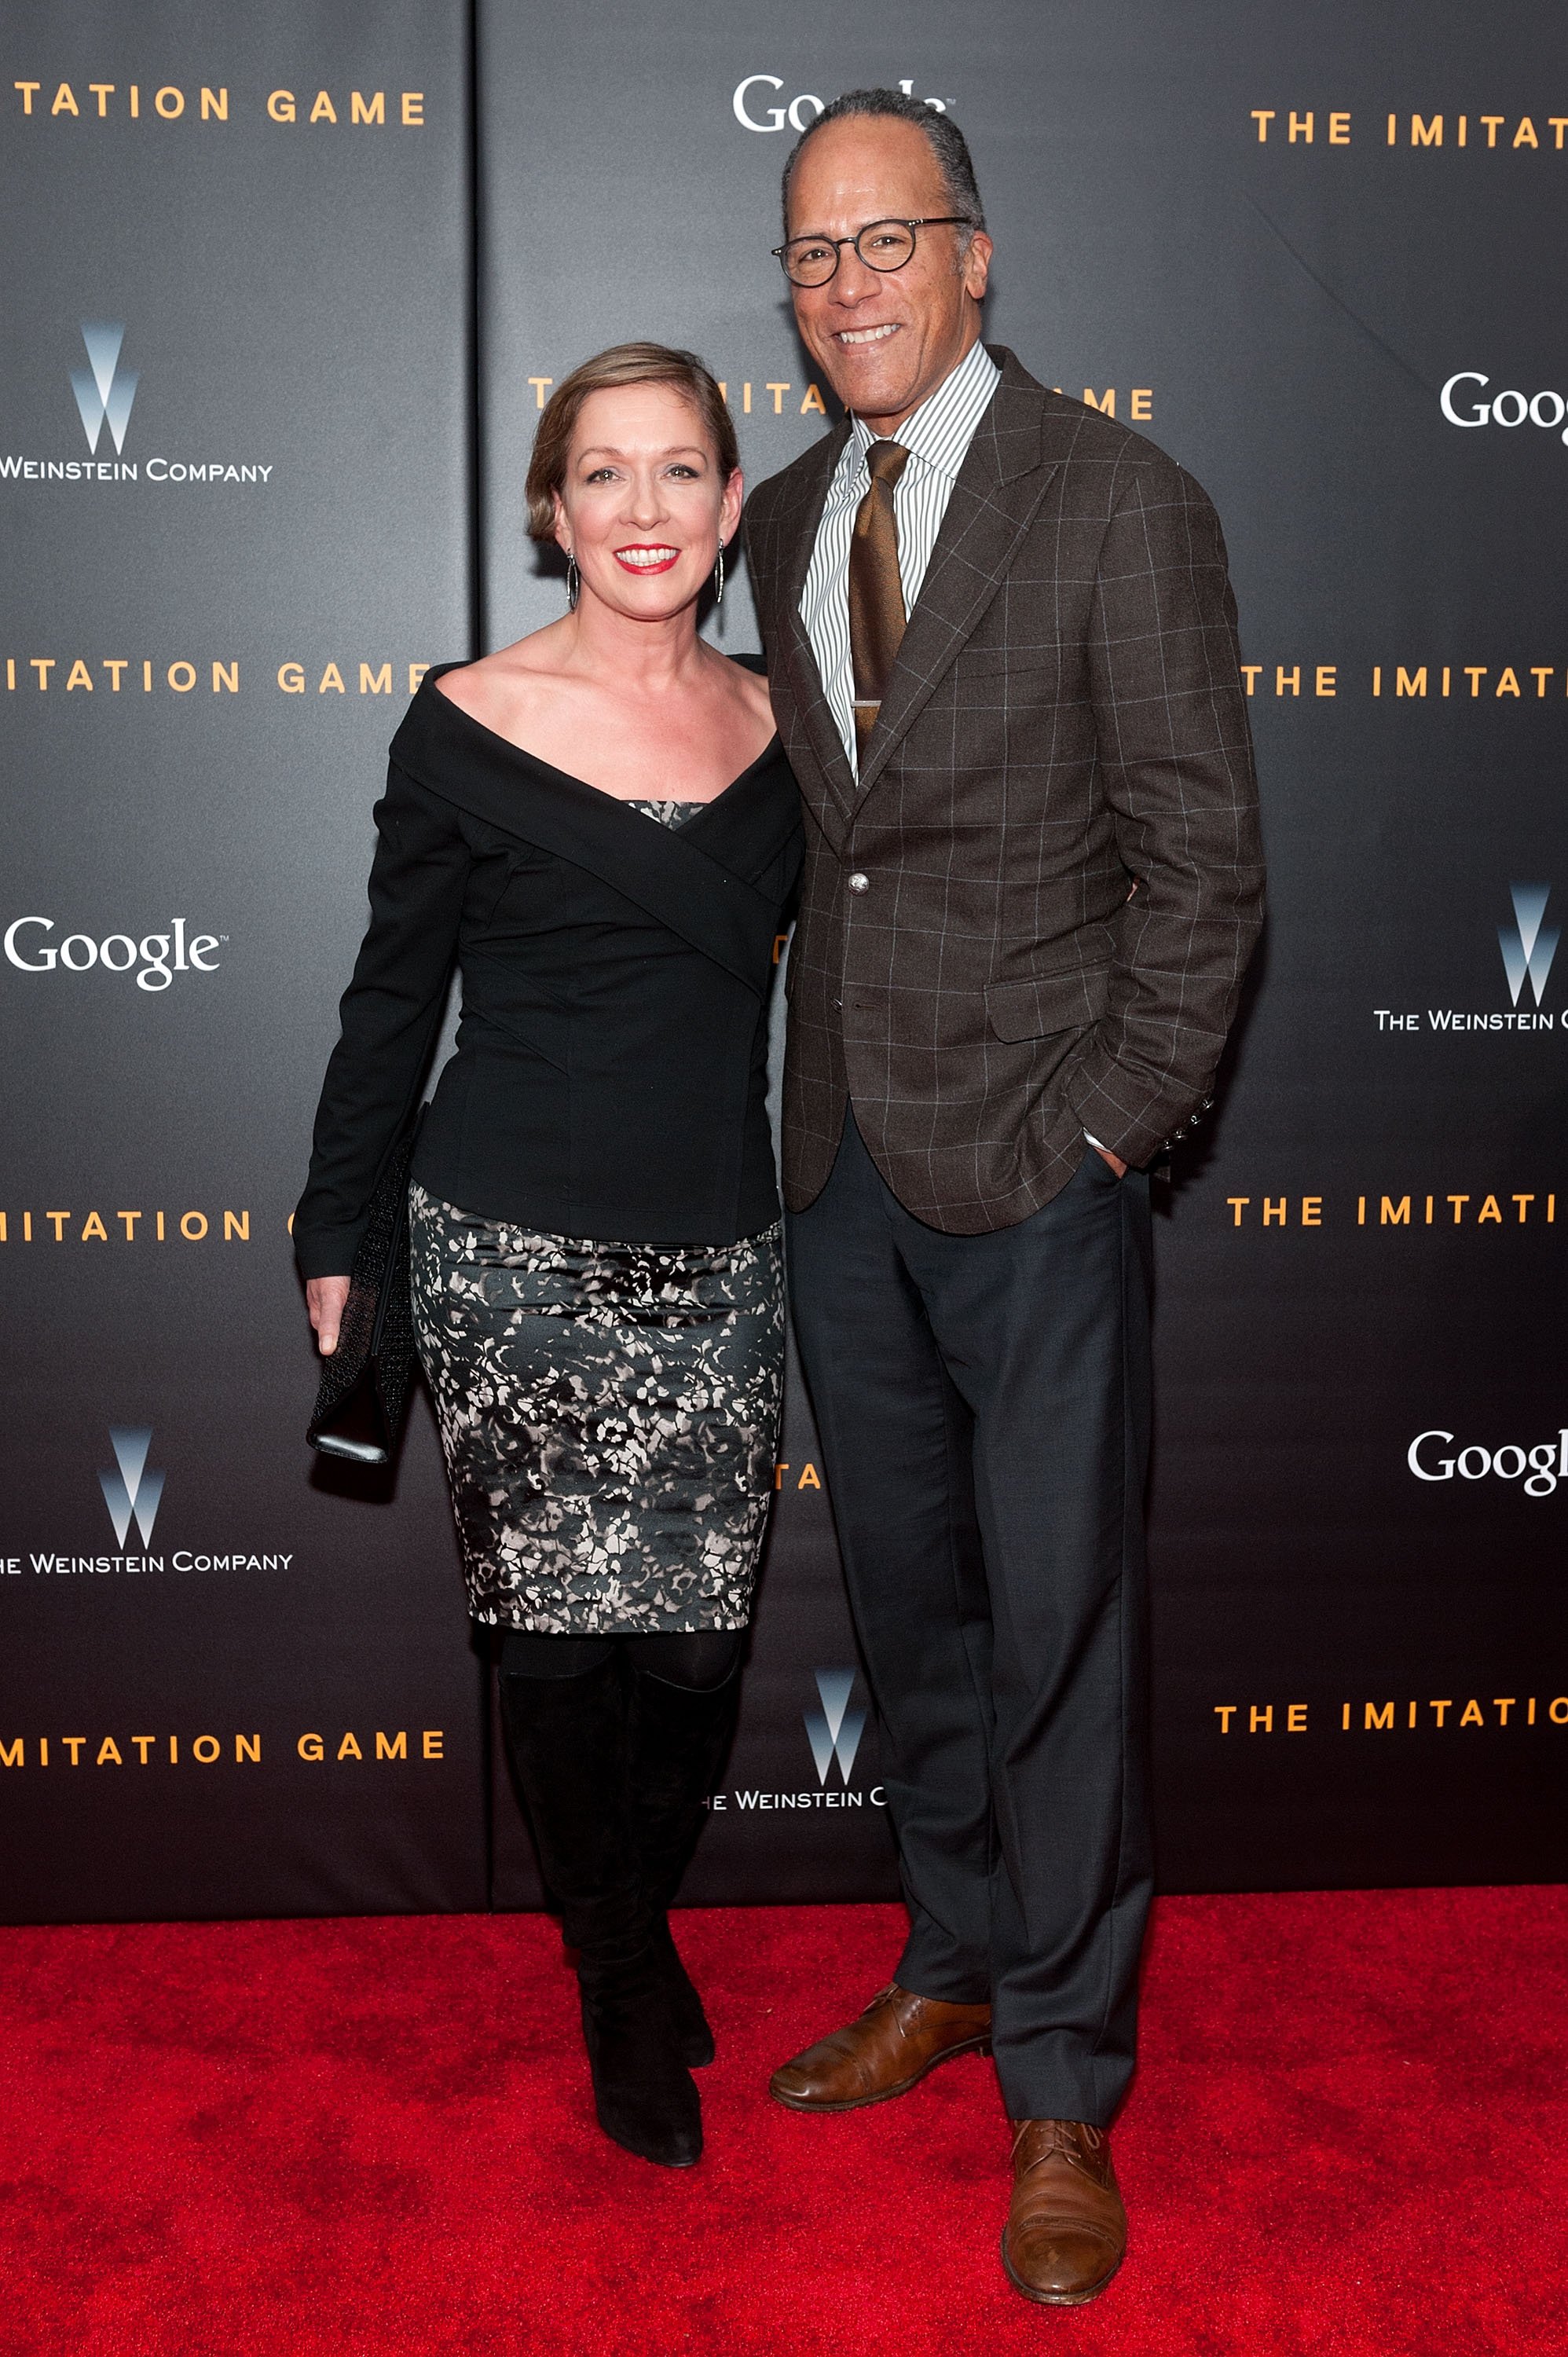 Lester Holt (R) and wife Carol Hagen at the New York premiere of "The Imitation Game" at the Ziegfeld Theater on November 17, 2014 in New York City | Source: Getty Images